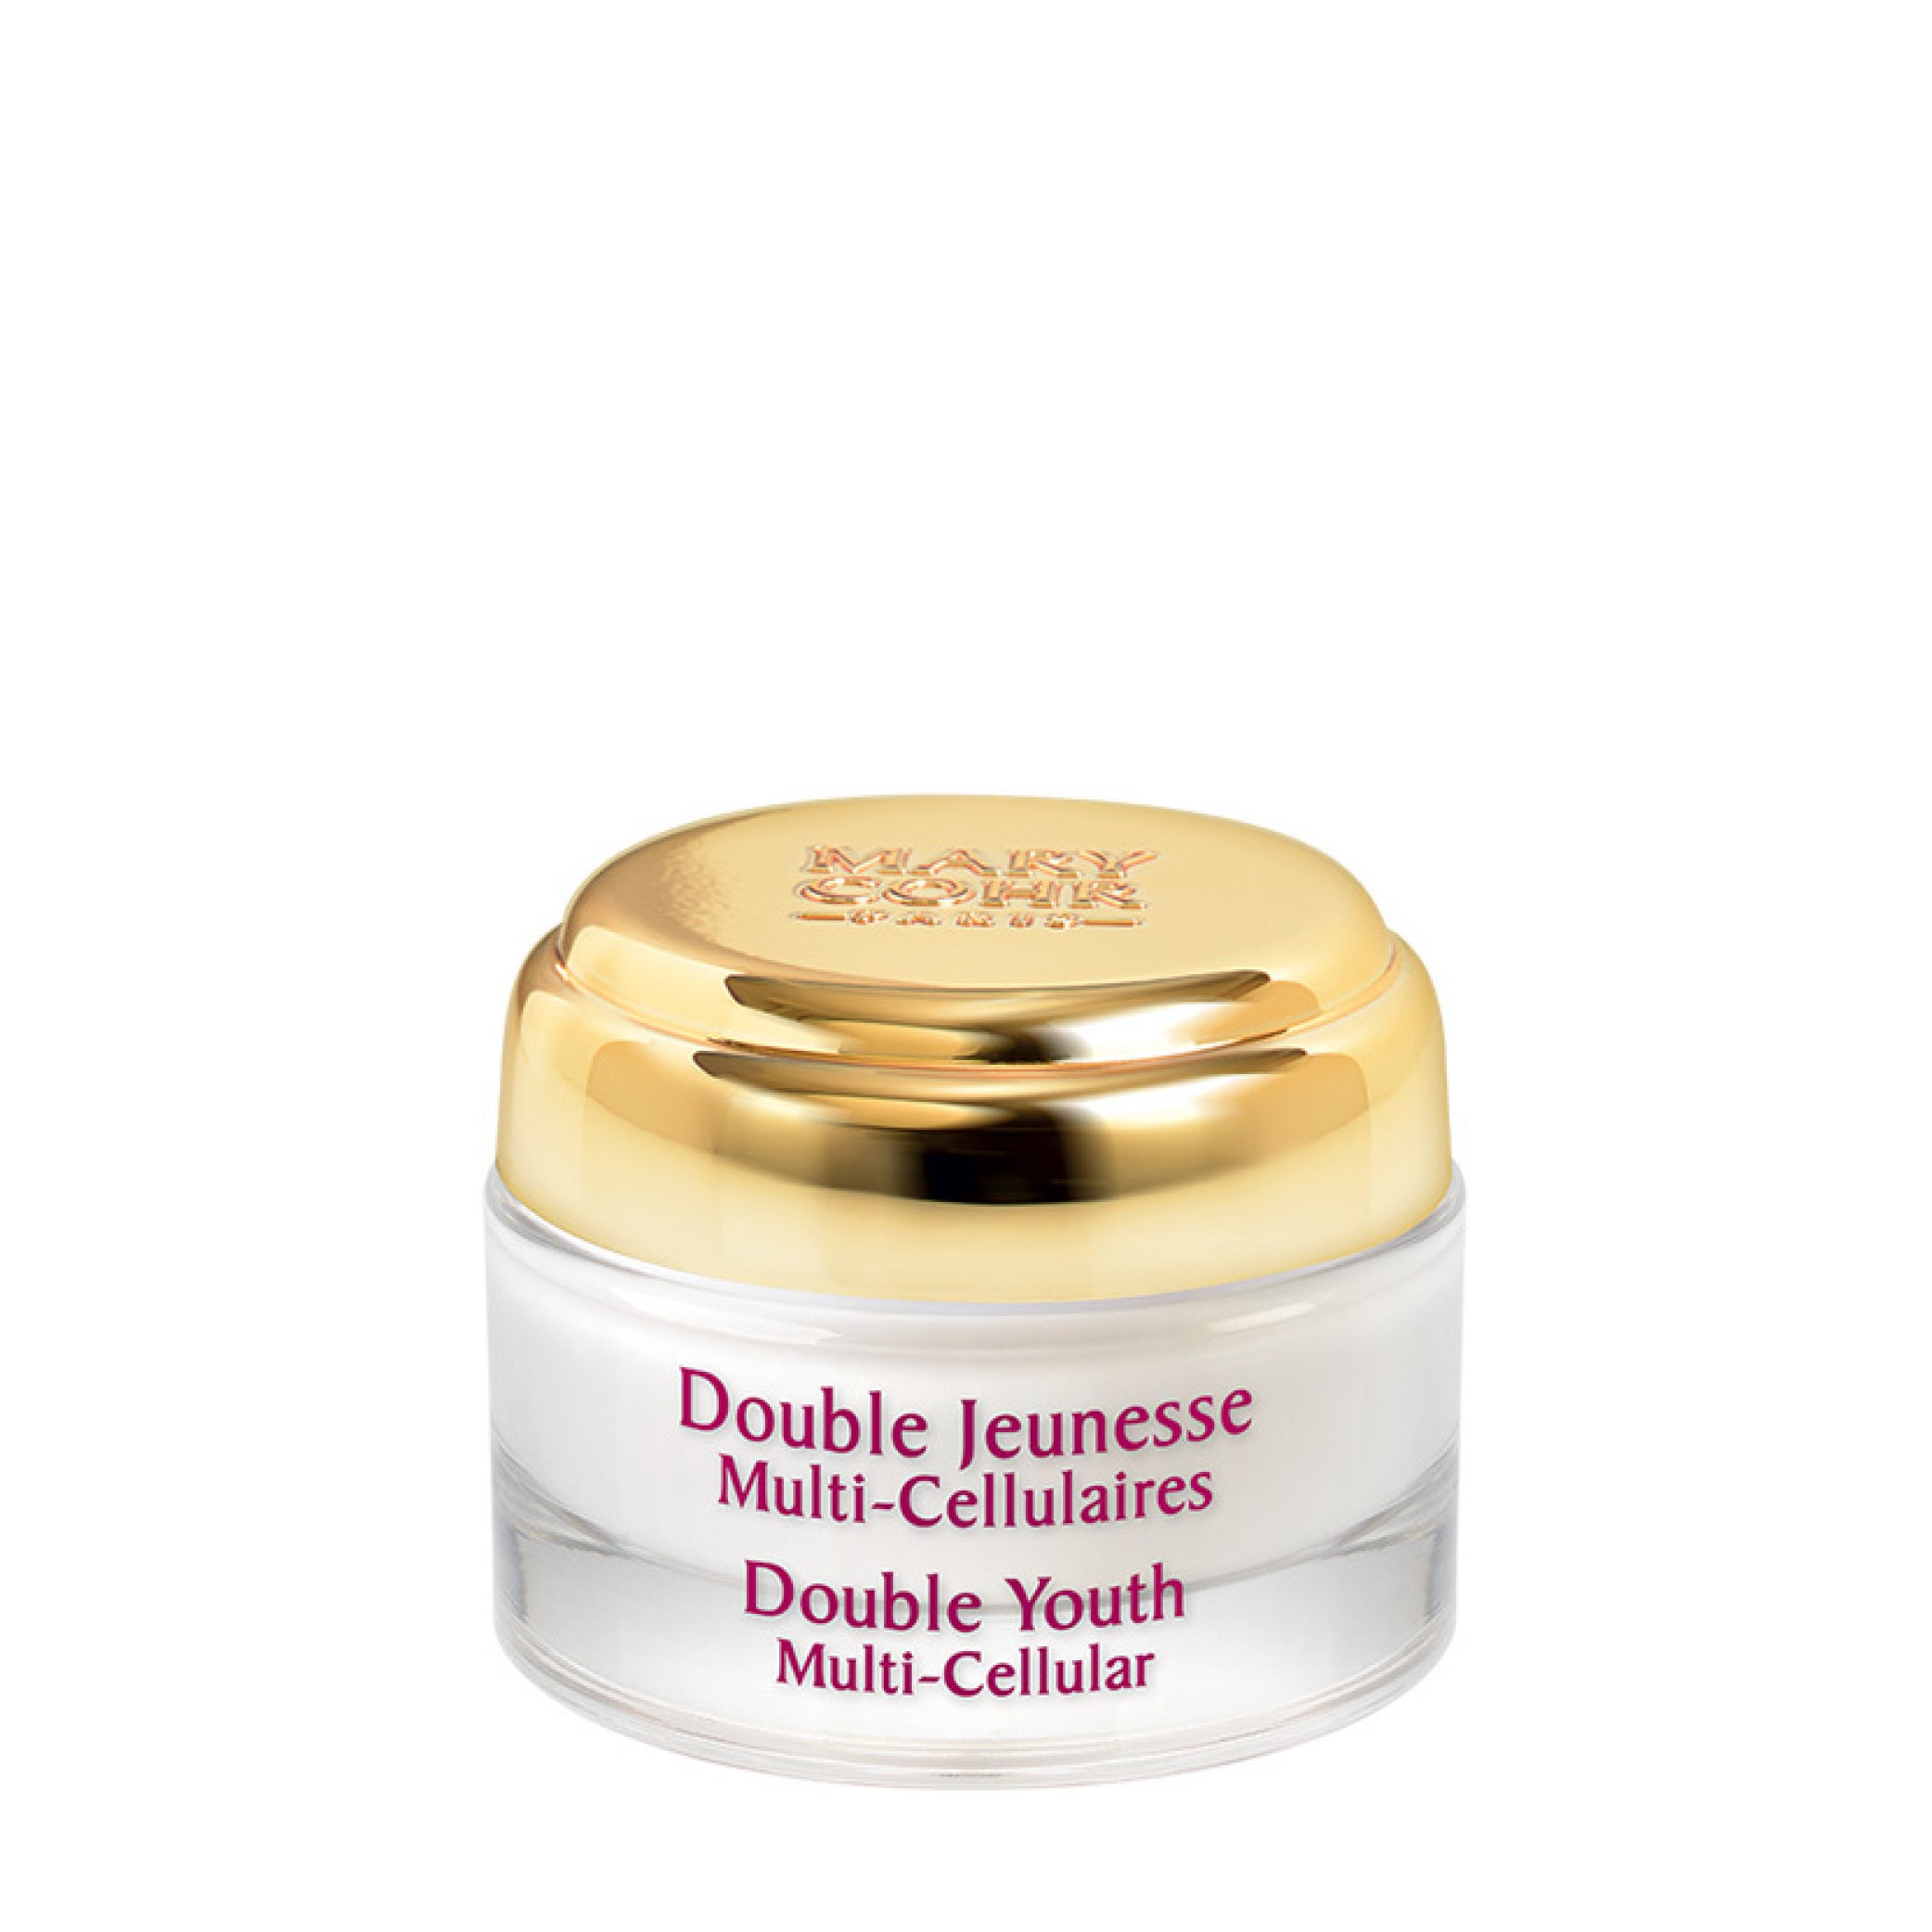 Double Youth Multi-Cellular Cream